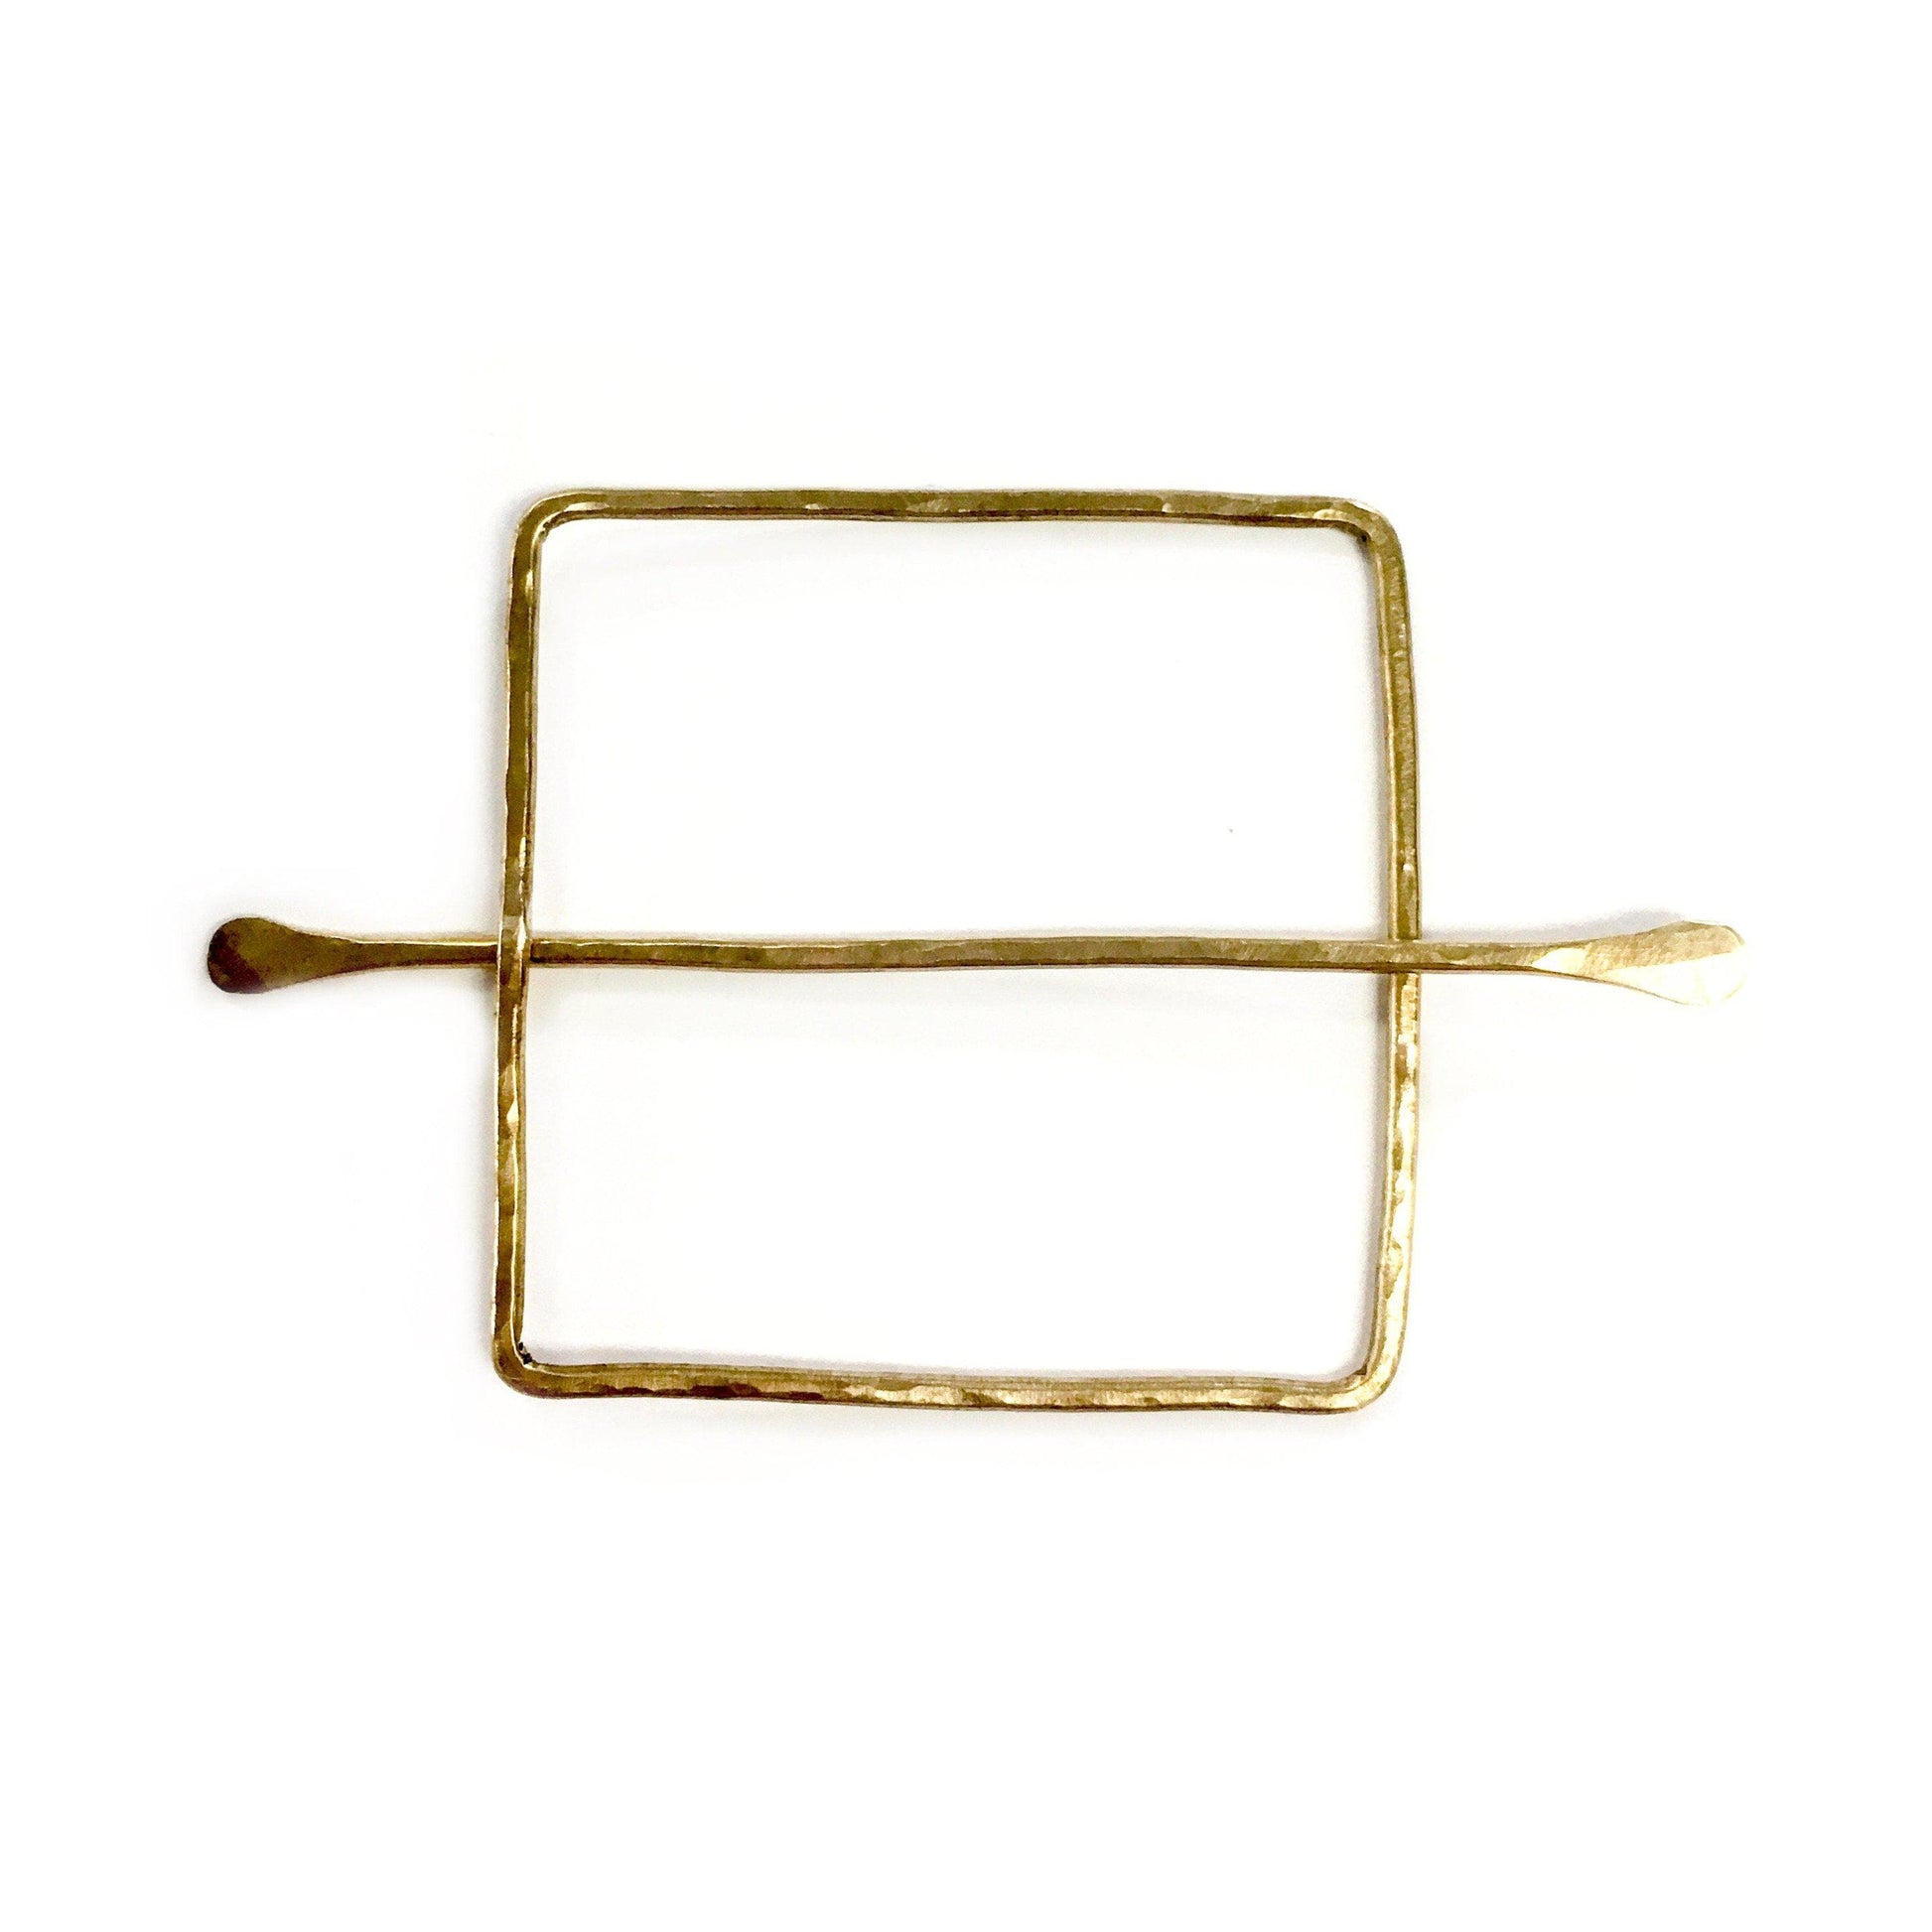  Square Hair Slide **** Currently in Anthropologie, hair pin, adorn512, adorn512